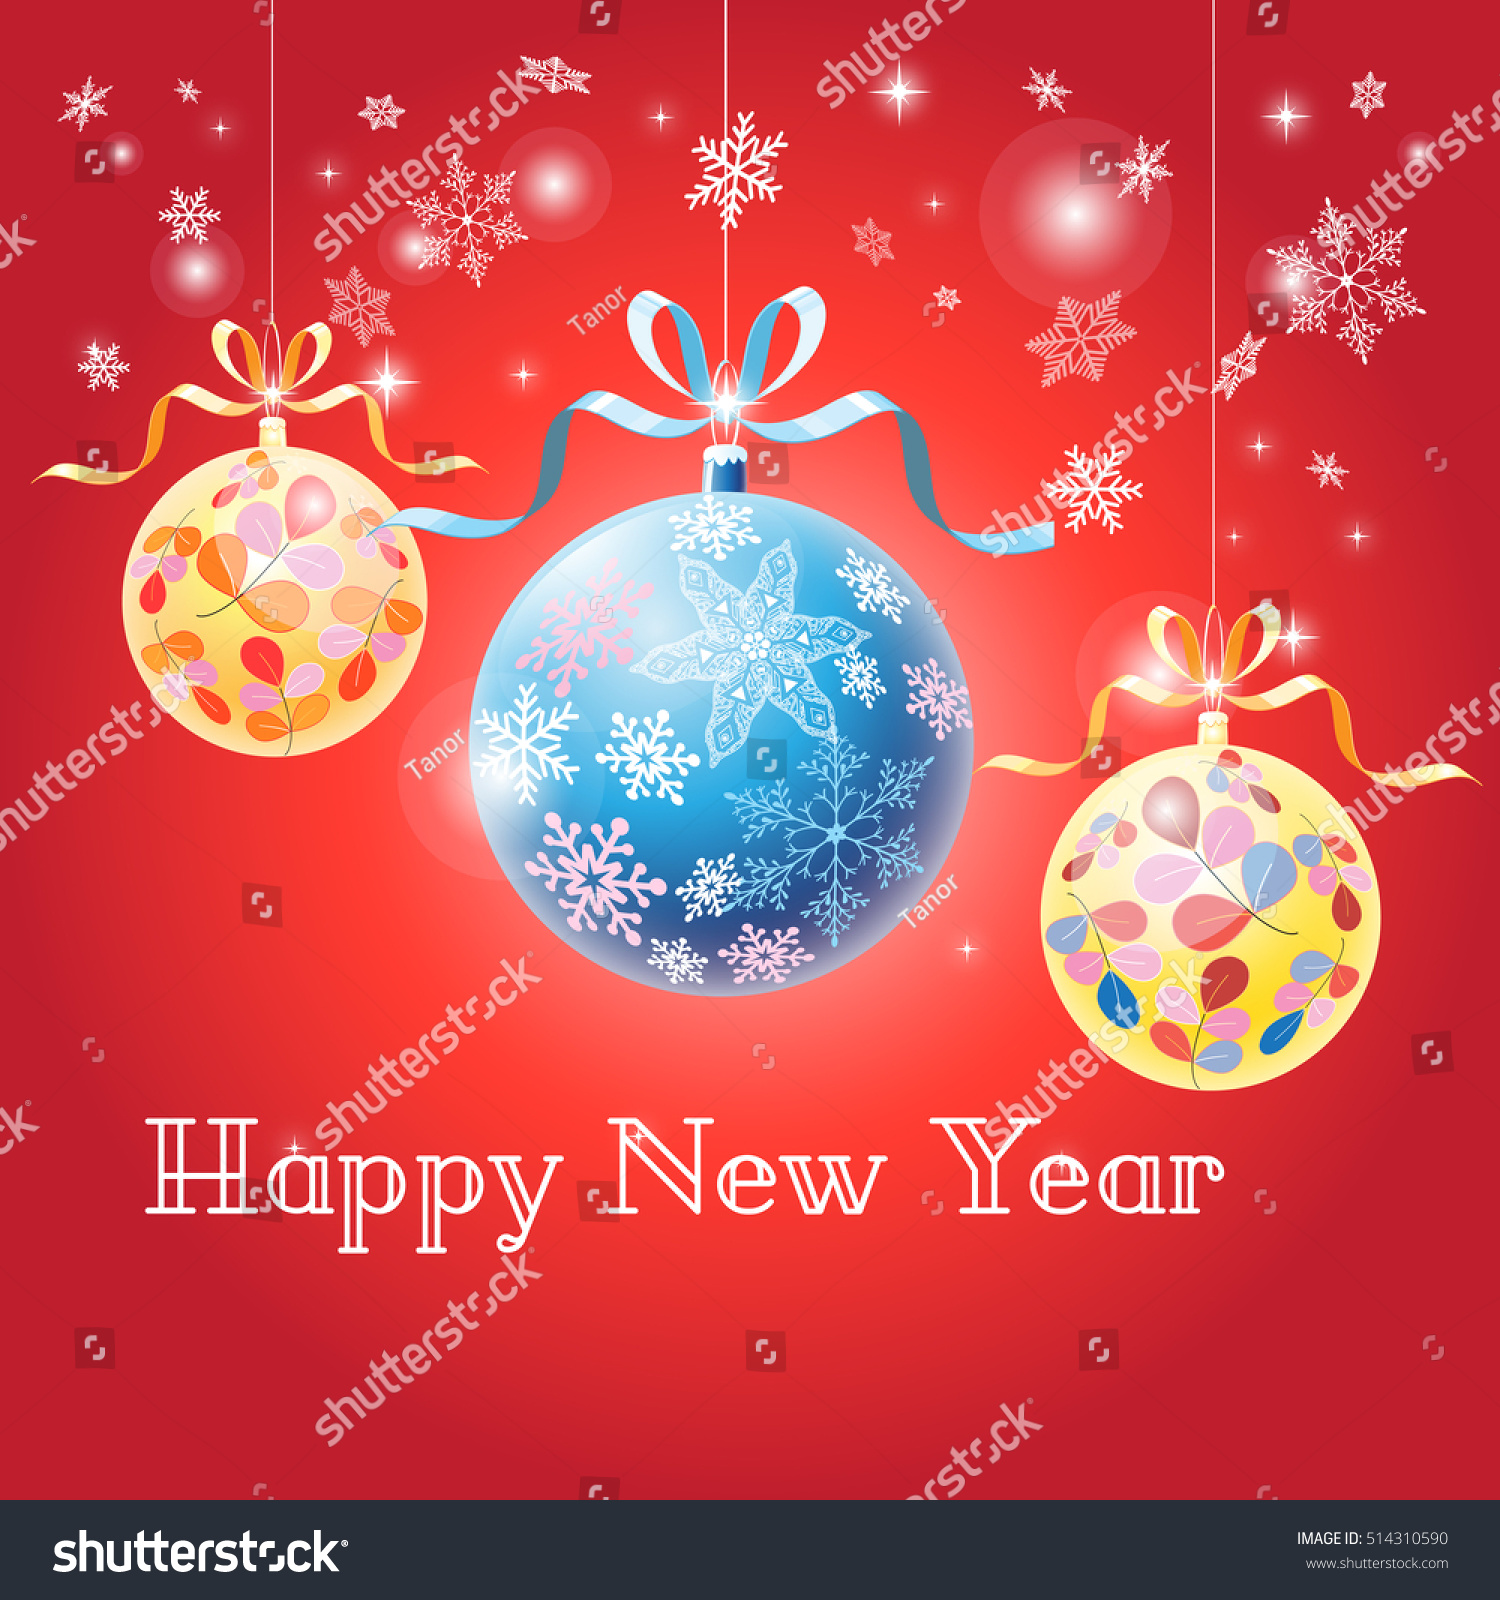 Festive Christmas card with Christmas balls on a red background